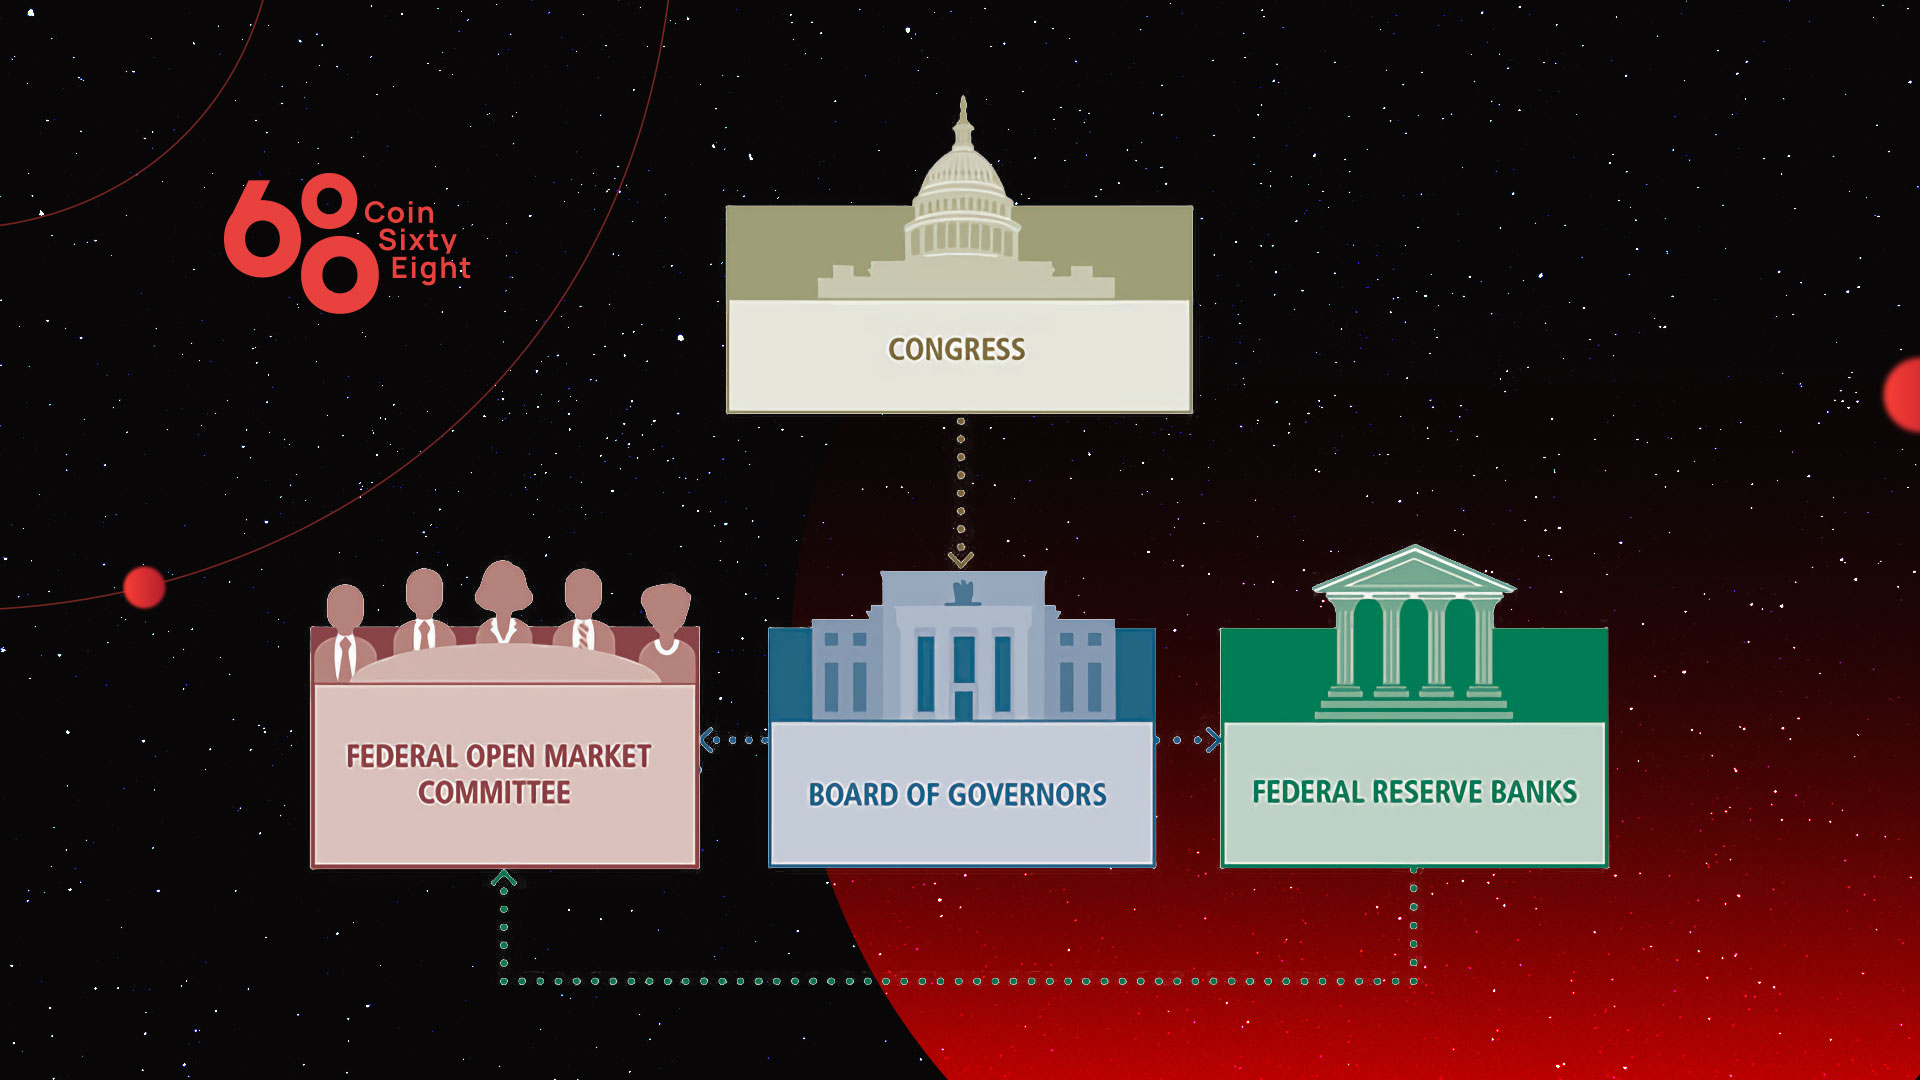 Organizational structure of the Fed